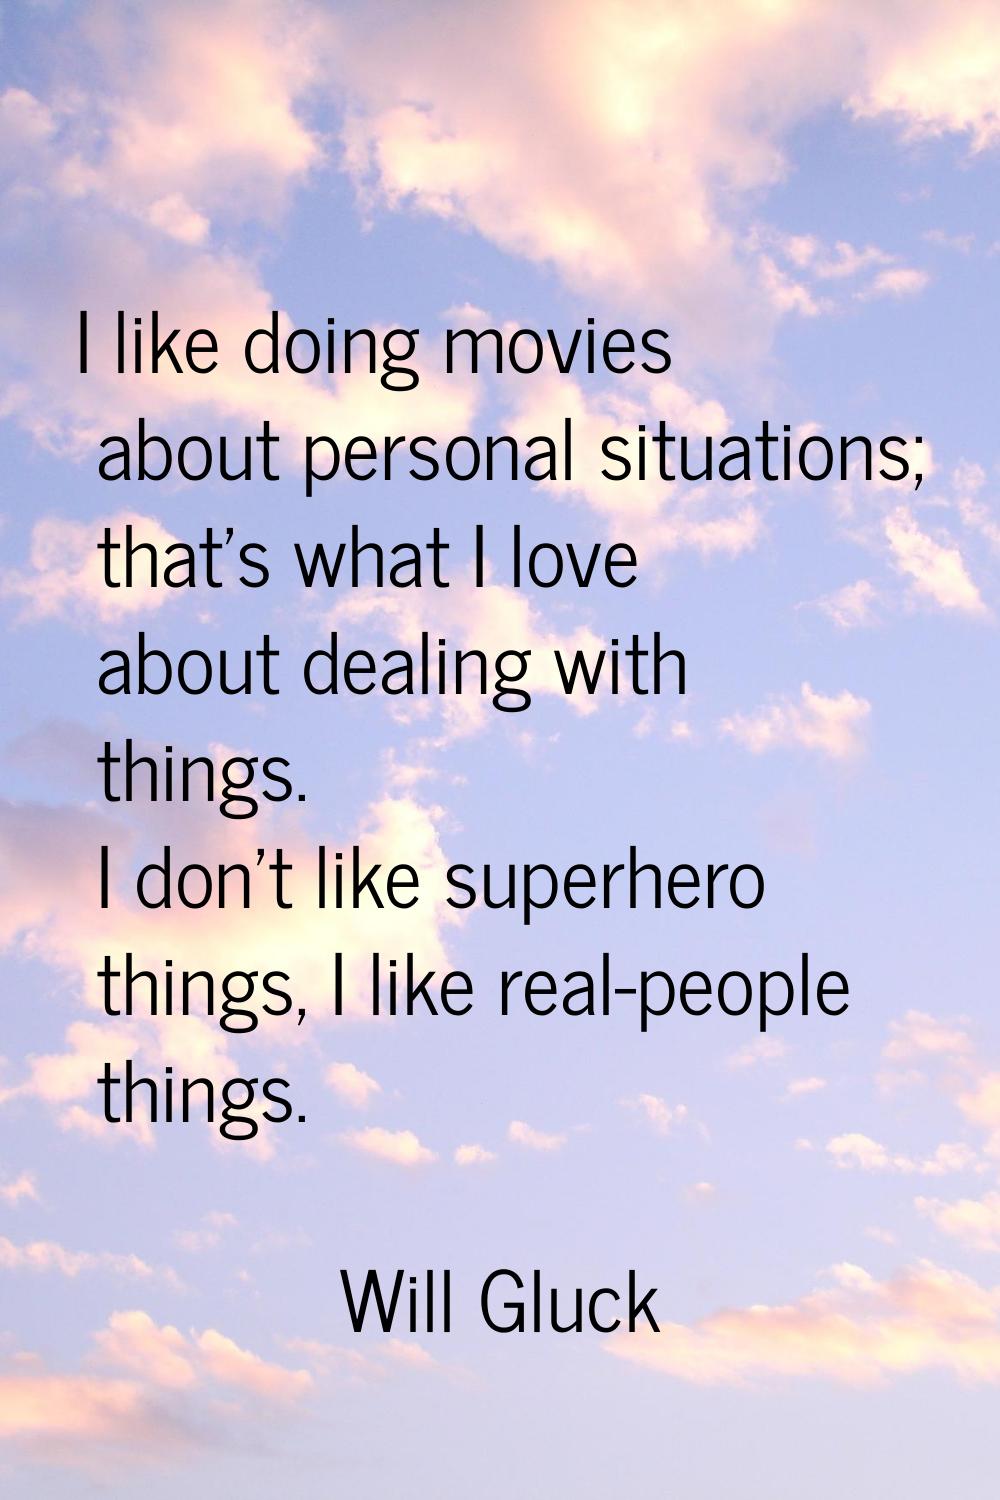 I like doing movies about personal situations; that's what I love about dealing with things. I don'